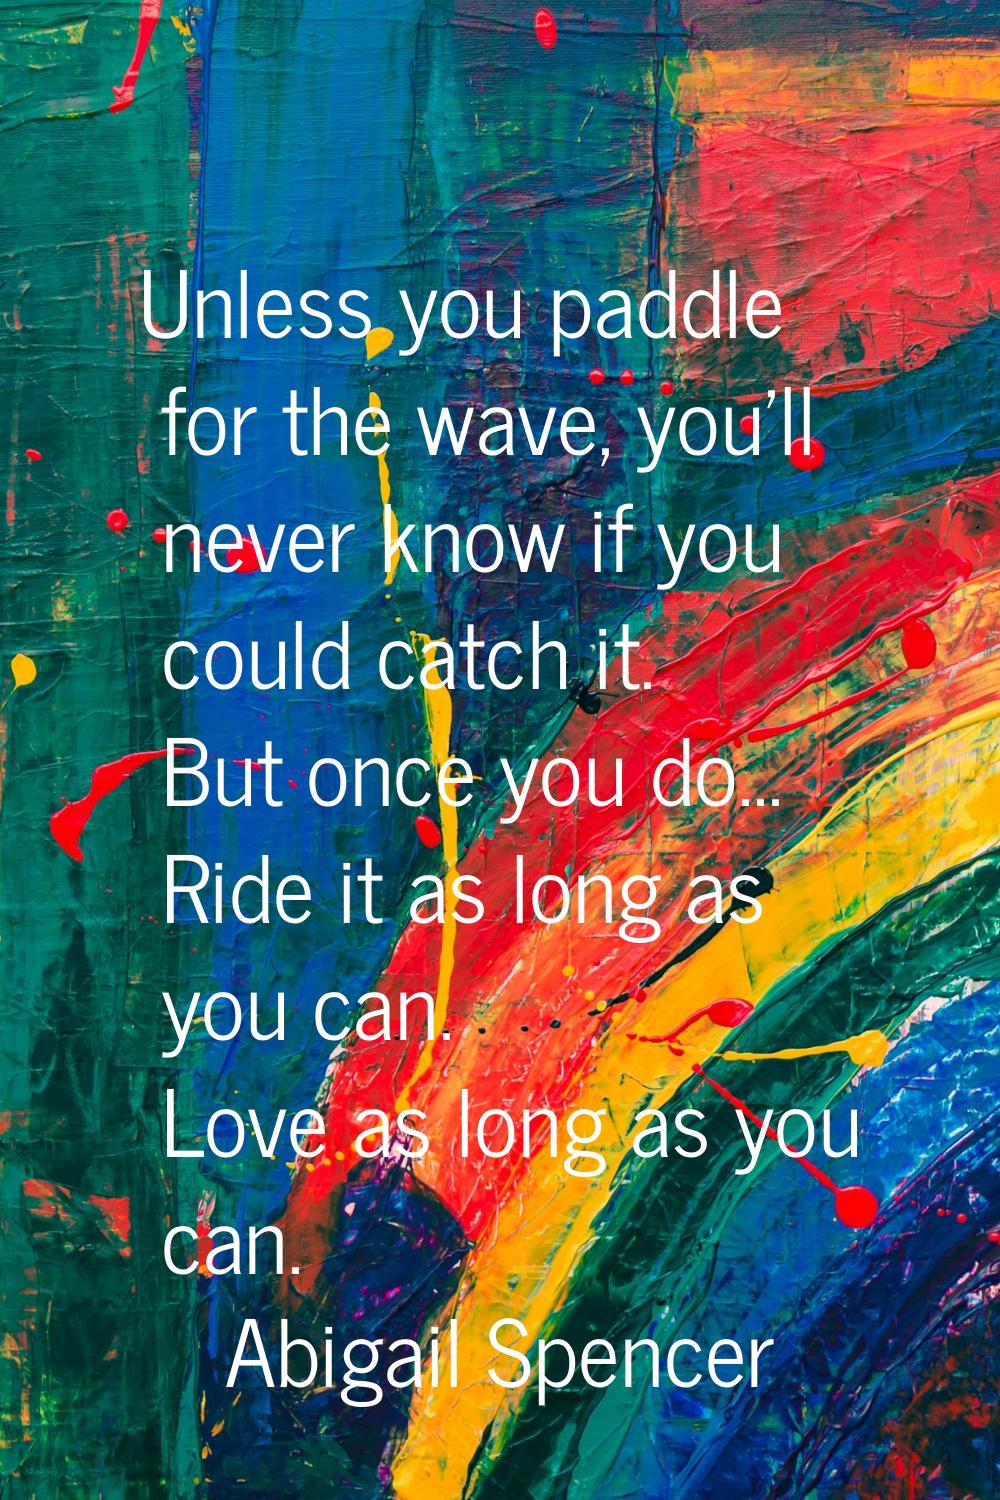 Unless you paddle for the wave, you'll never know if you could catch it. But once you do... Ride it